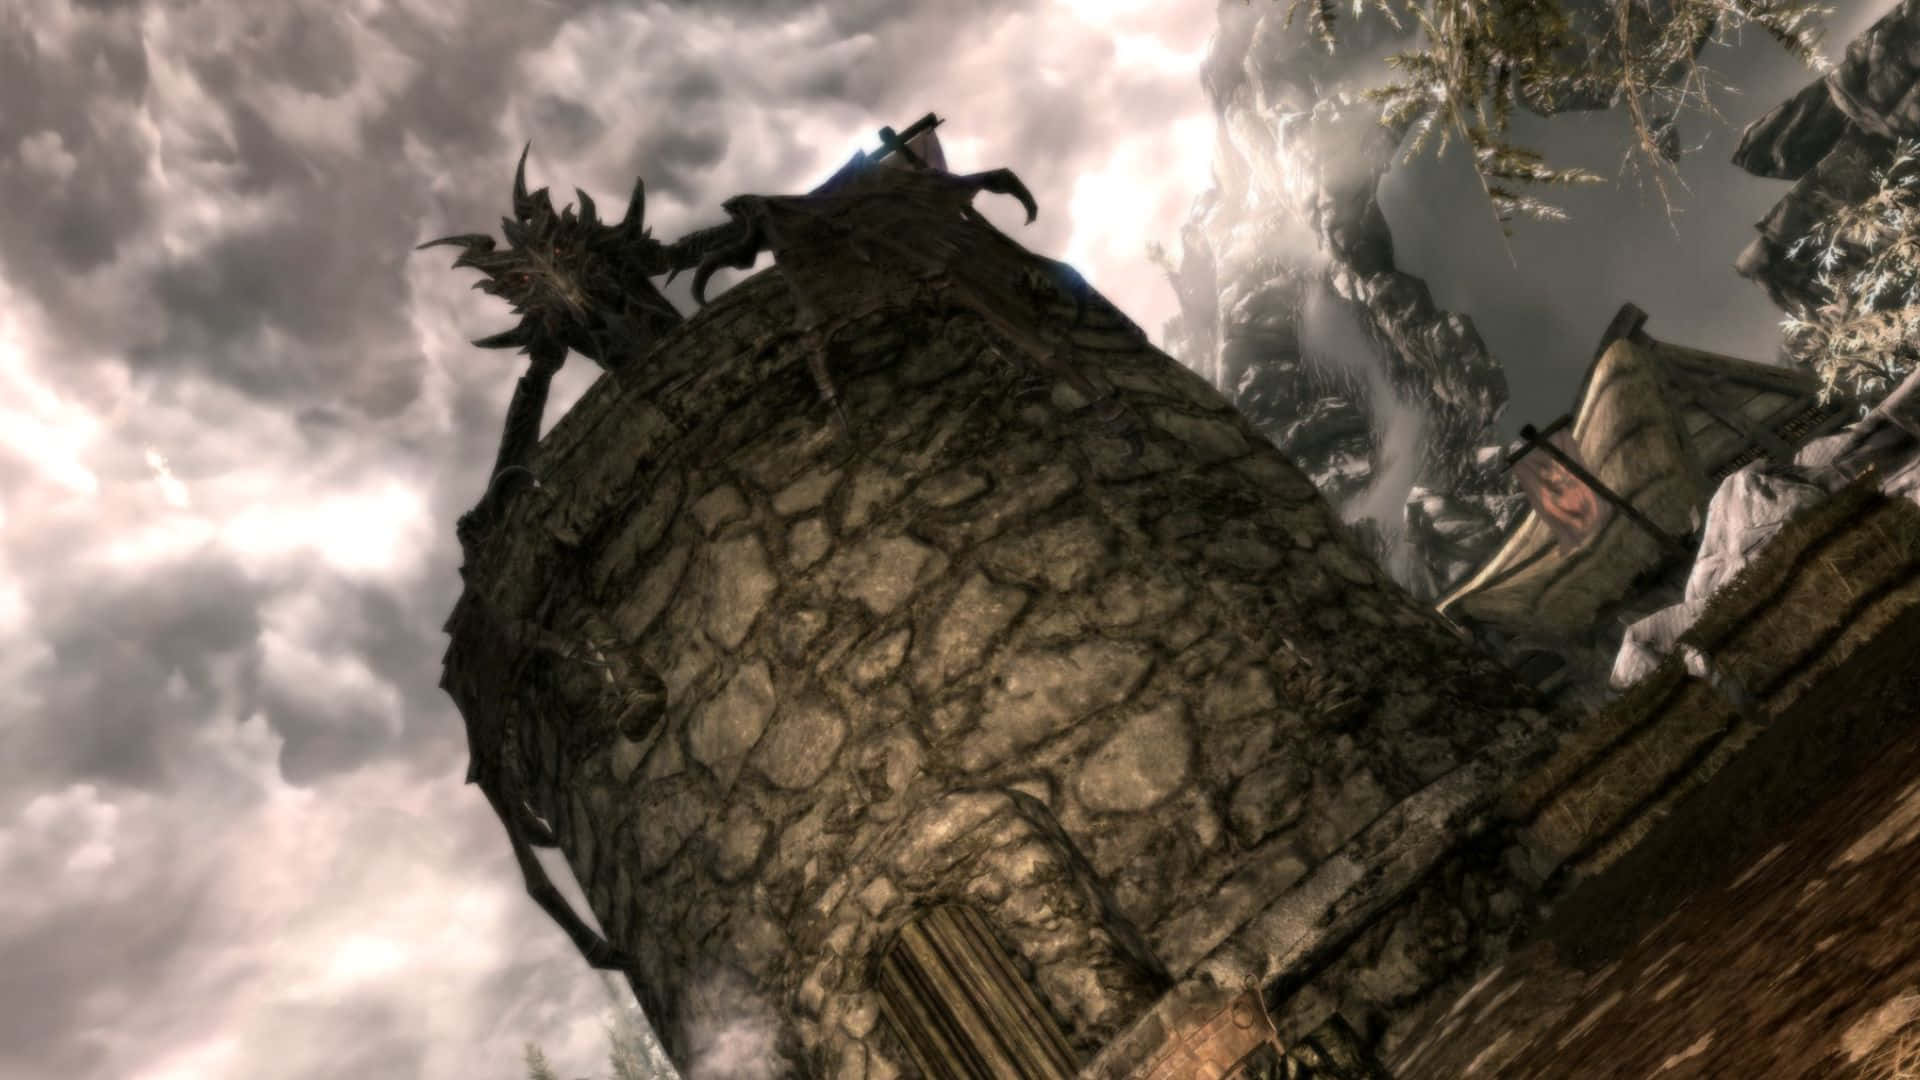 Alduin, The World-Eater, in a fierce battle in the epic game of Skyrim Wallpaper